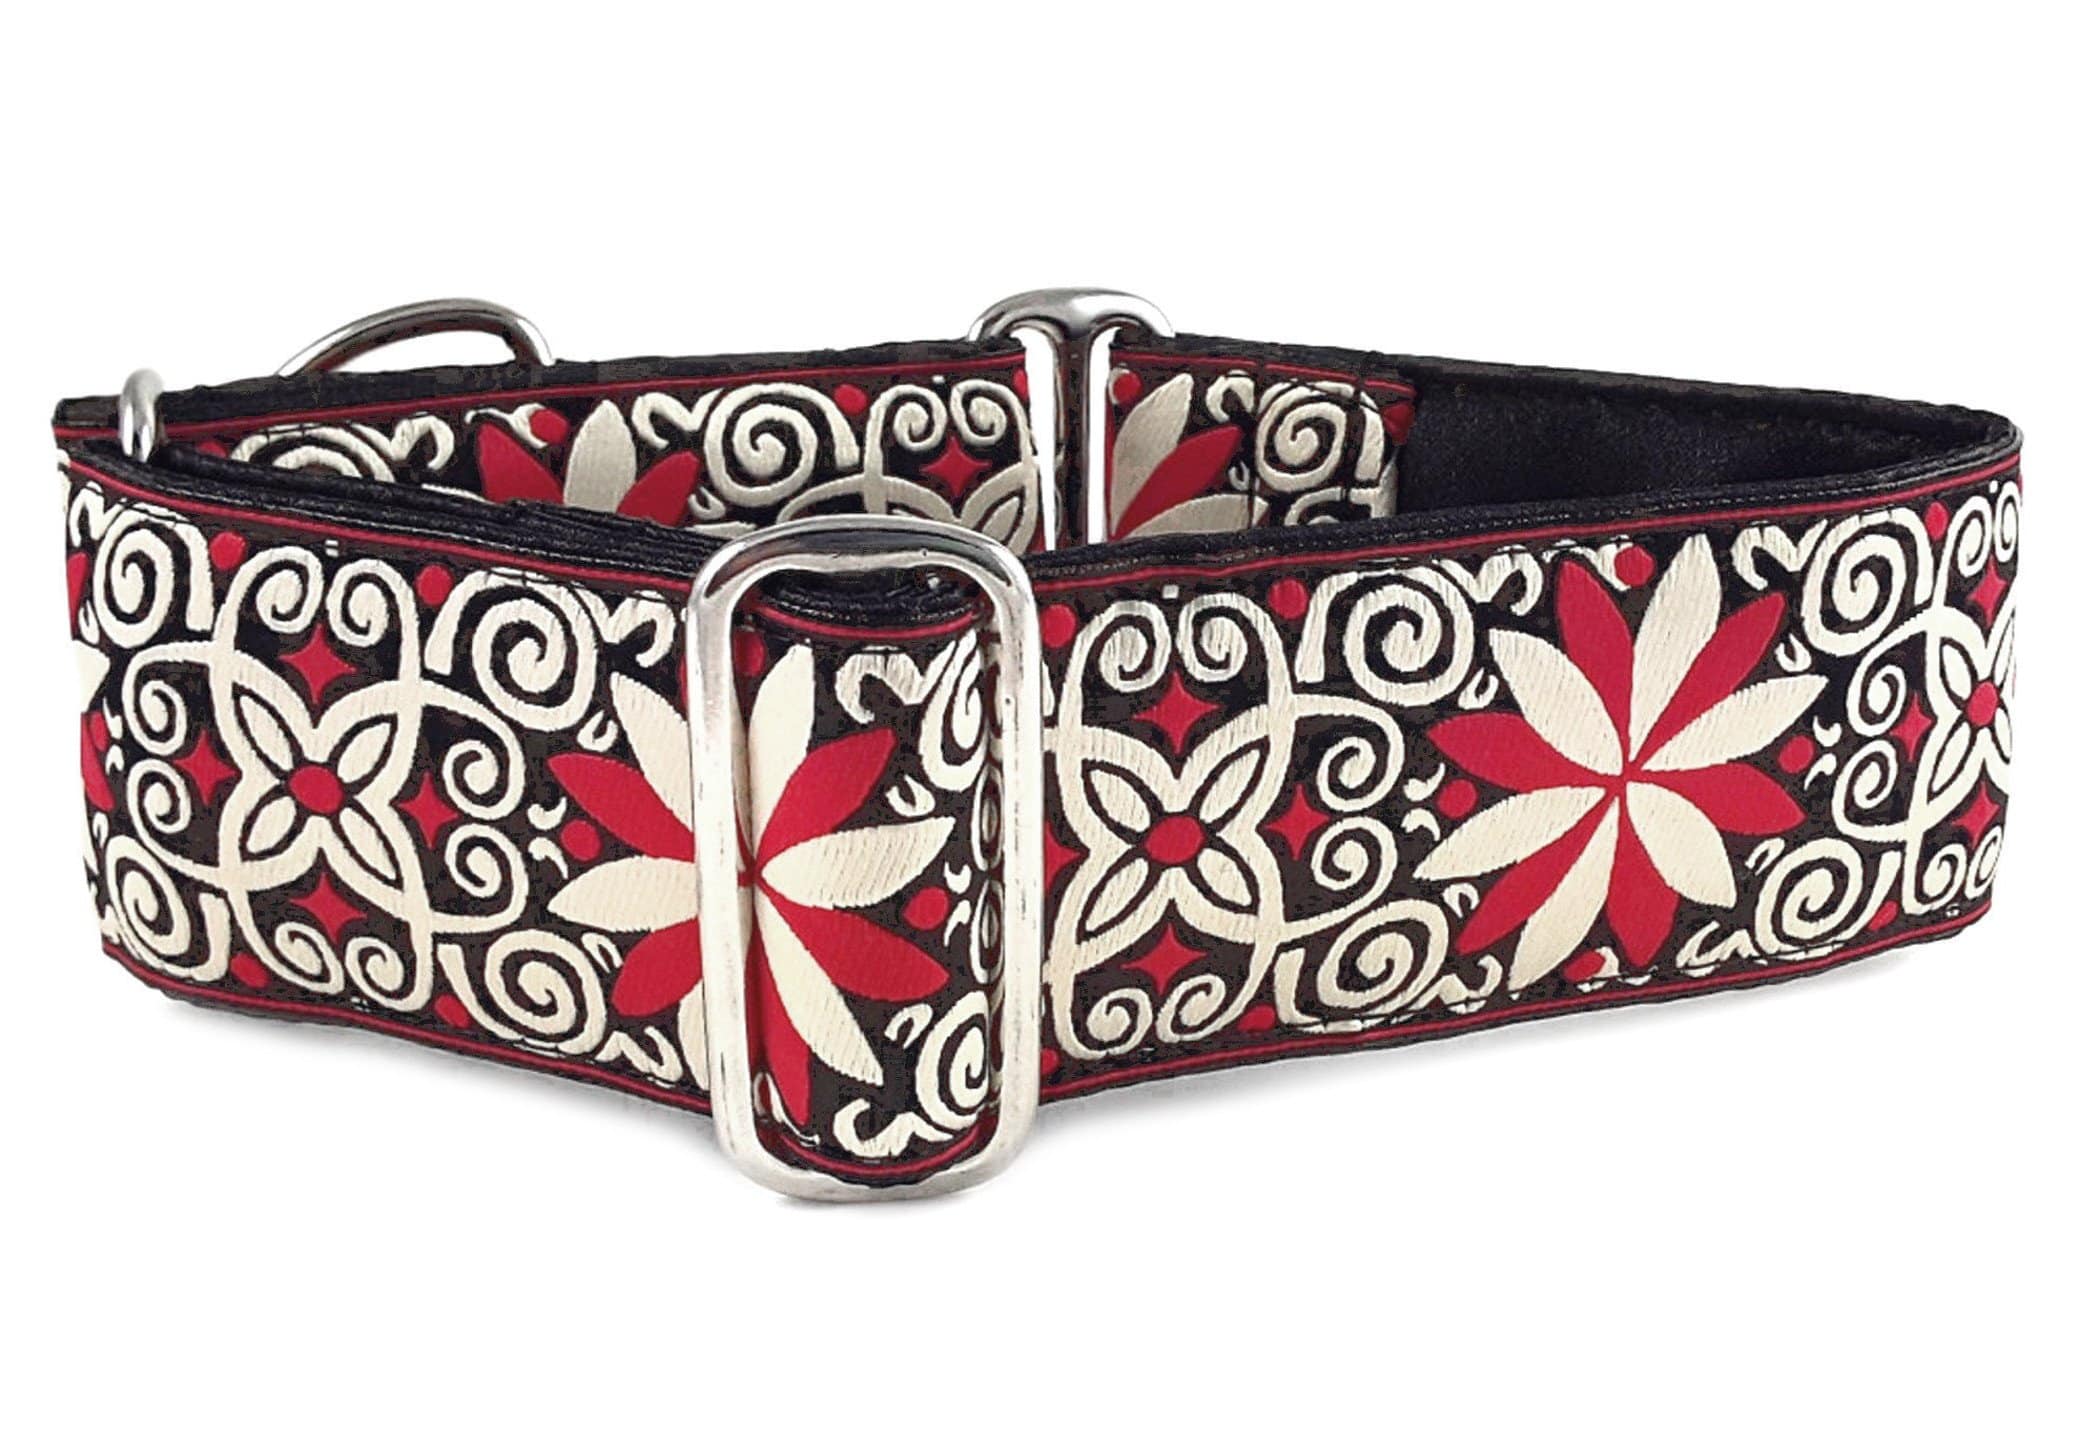 Arabesque Jacquard in Red & White - Martingale Dog Collar or Buckle Dog Collar - 2" Width - The Hound Haberdashery